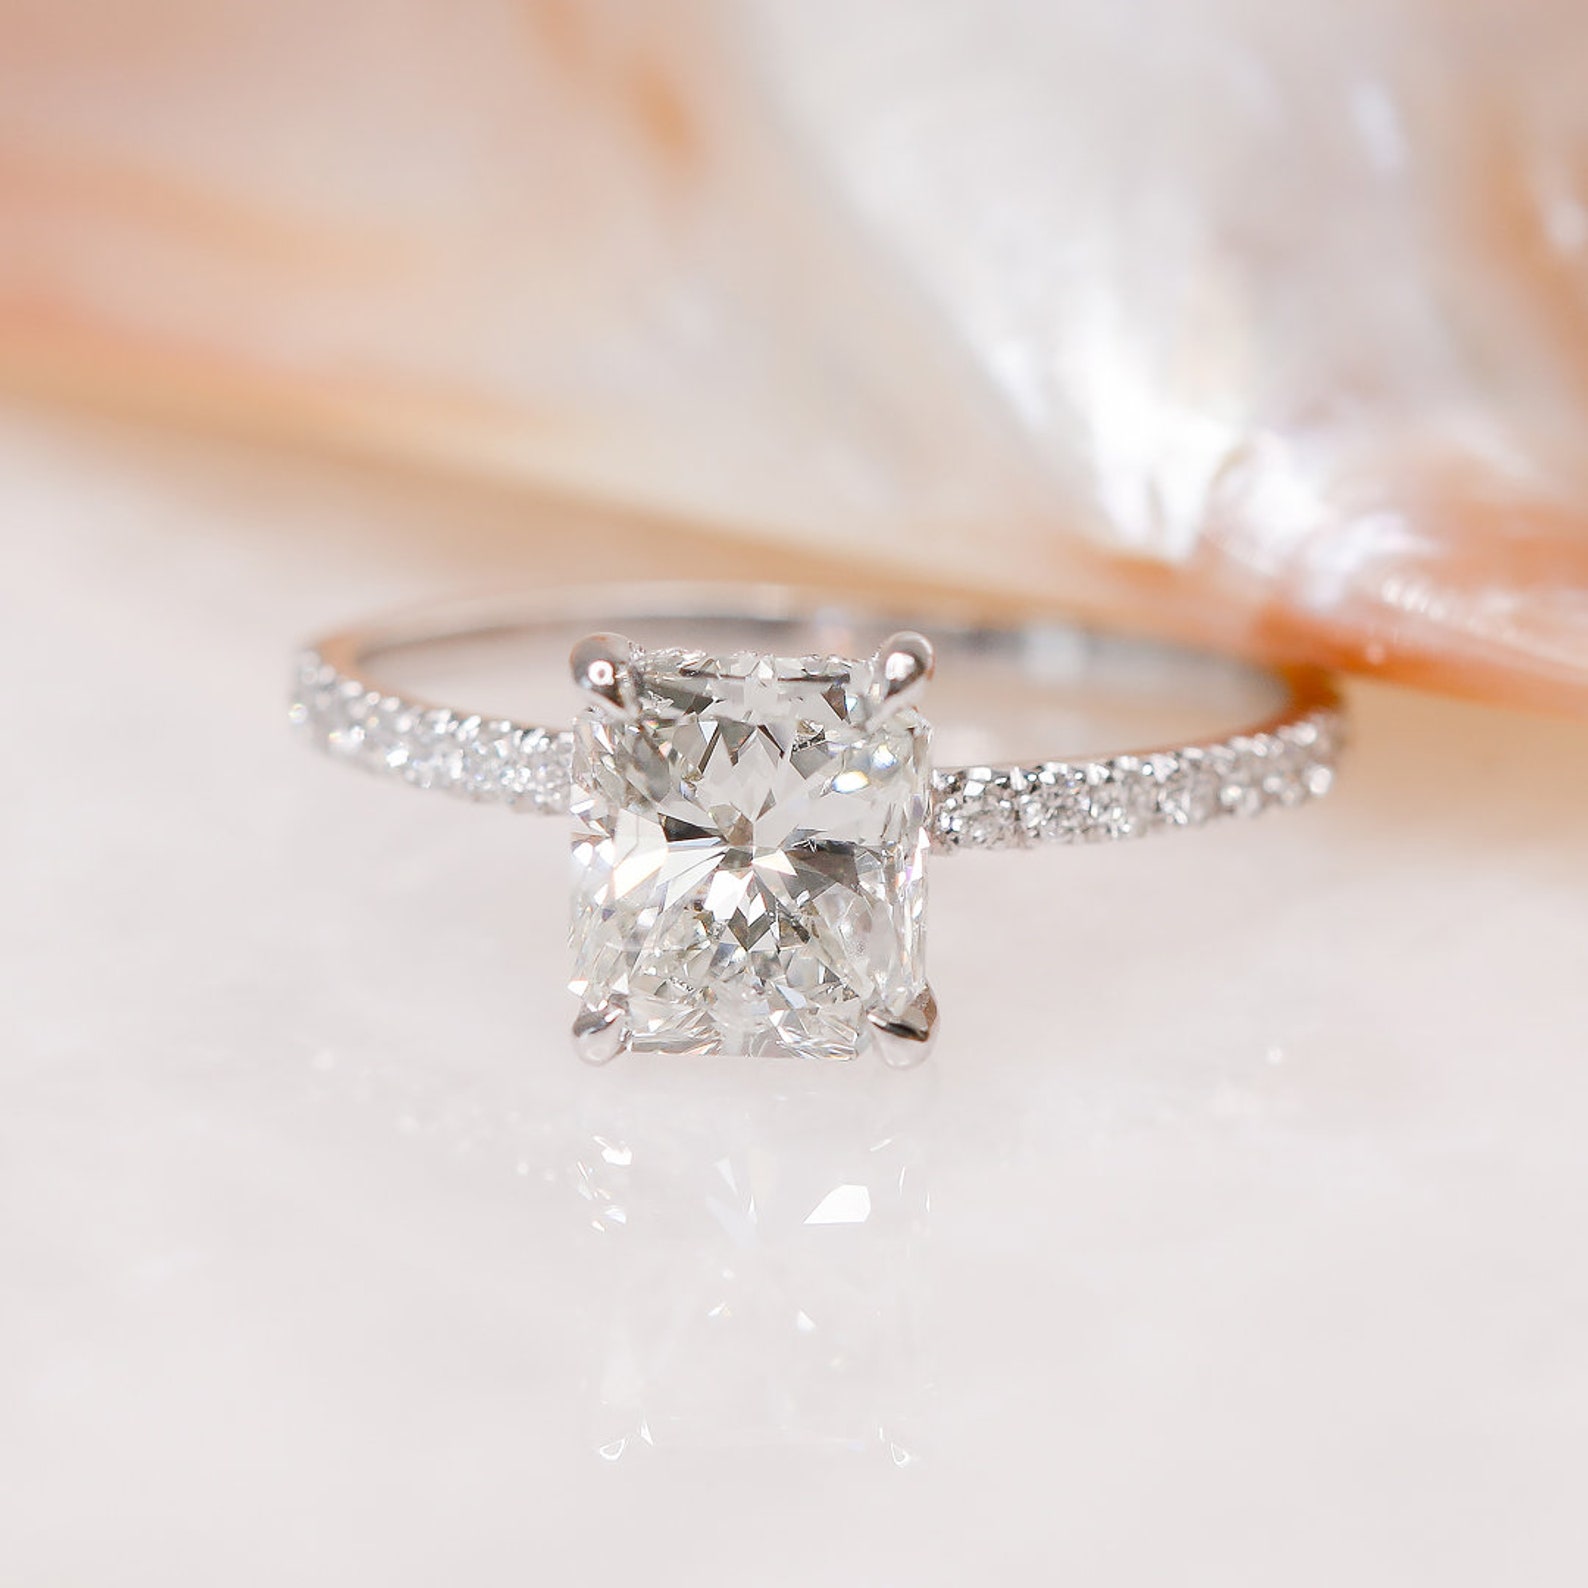 15 Engagement Rings for a Valentine's Day proposal (ready to ship!)